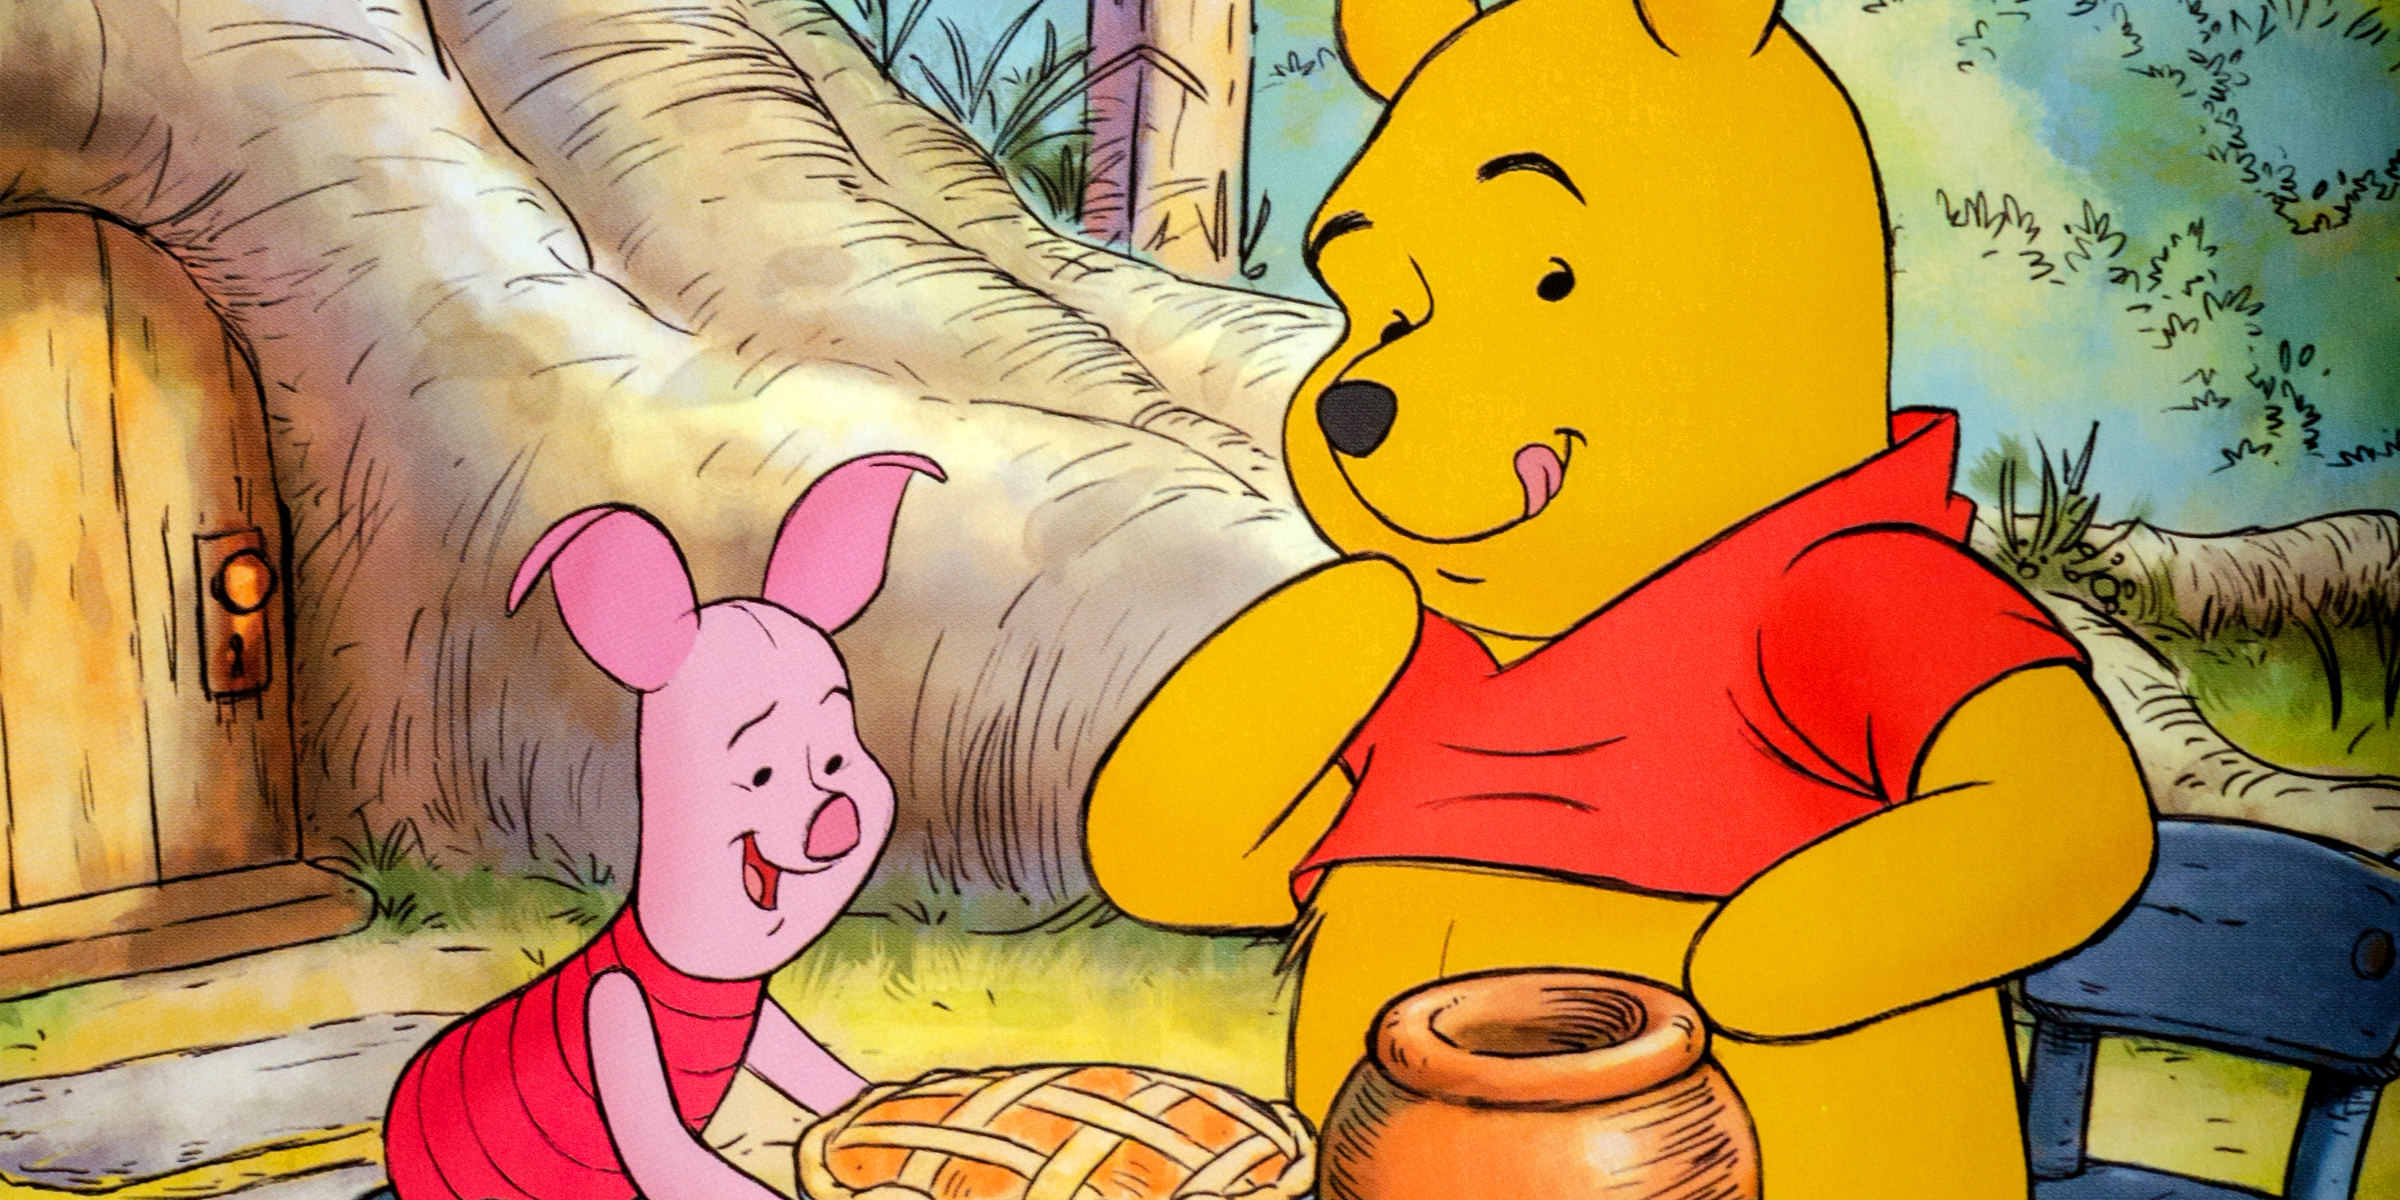 Winnie the Pooh and Piglet | Source: Shutterstock